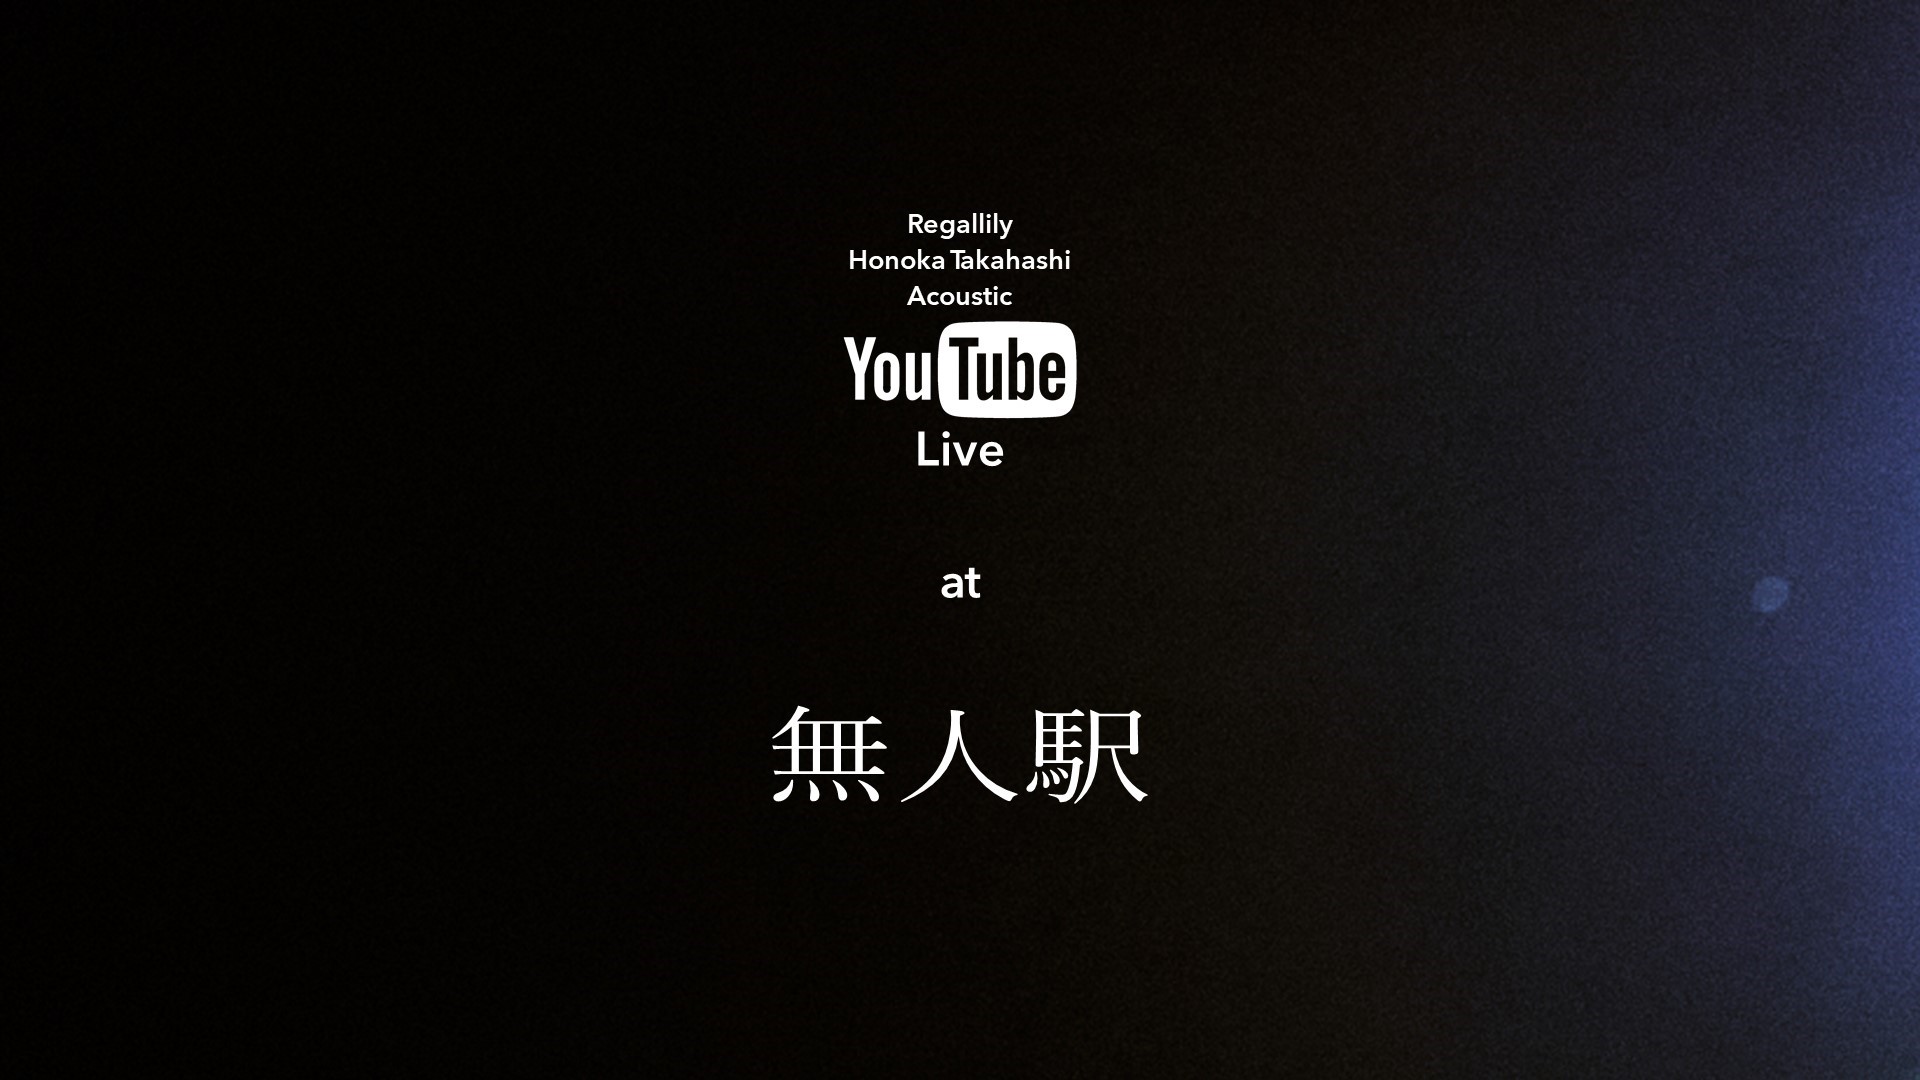 Honoka Takahashi's song "YouTube Live at Unmanned Station" will be distributed!